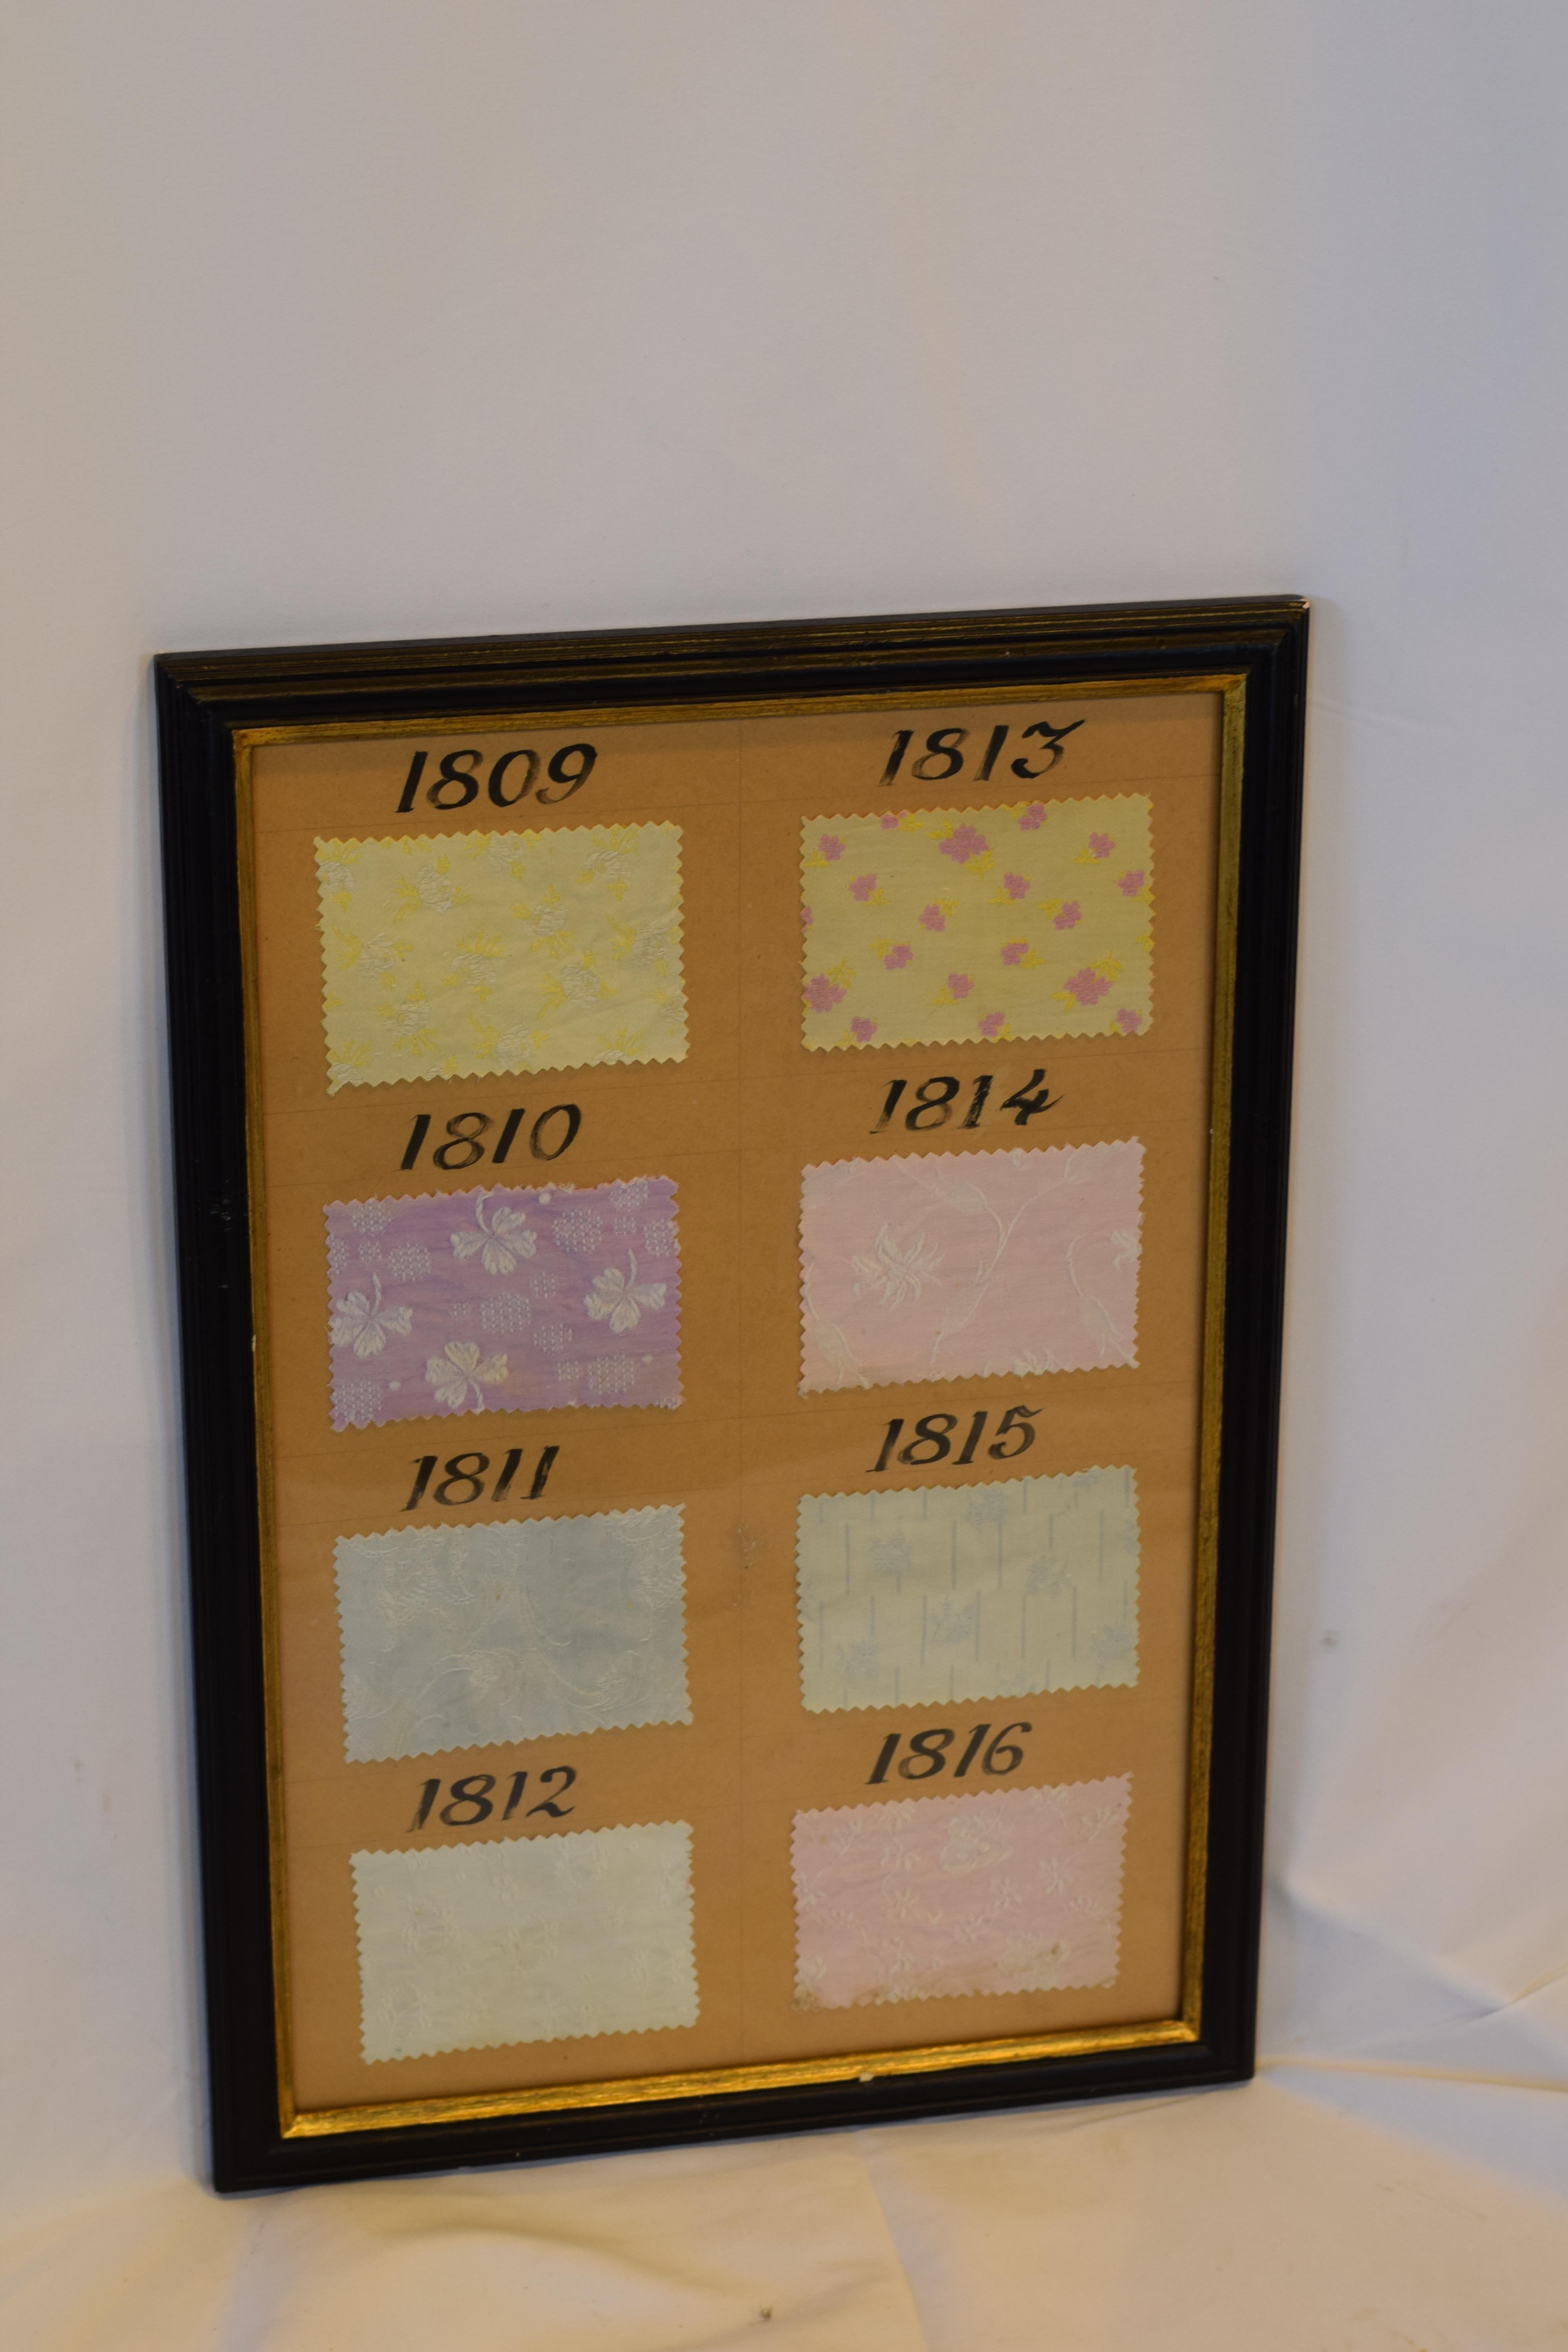 Charming framed vintage French fabric sample sheet from a shop sample book numbered with beautiful calligraphy script.